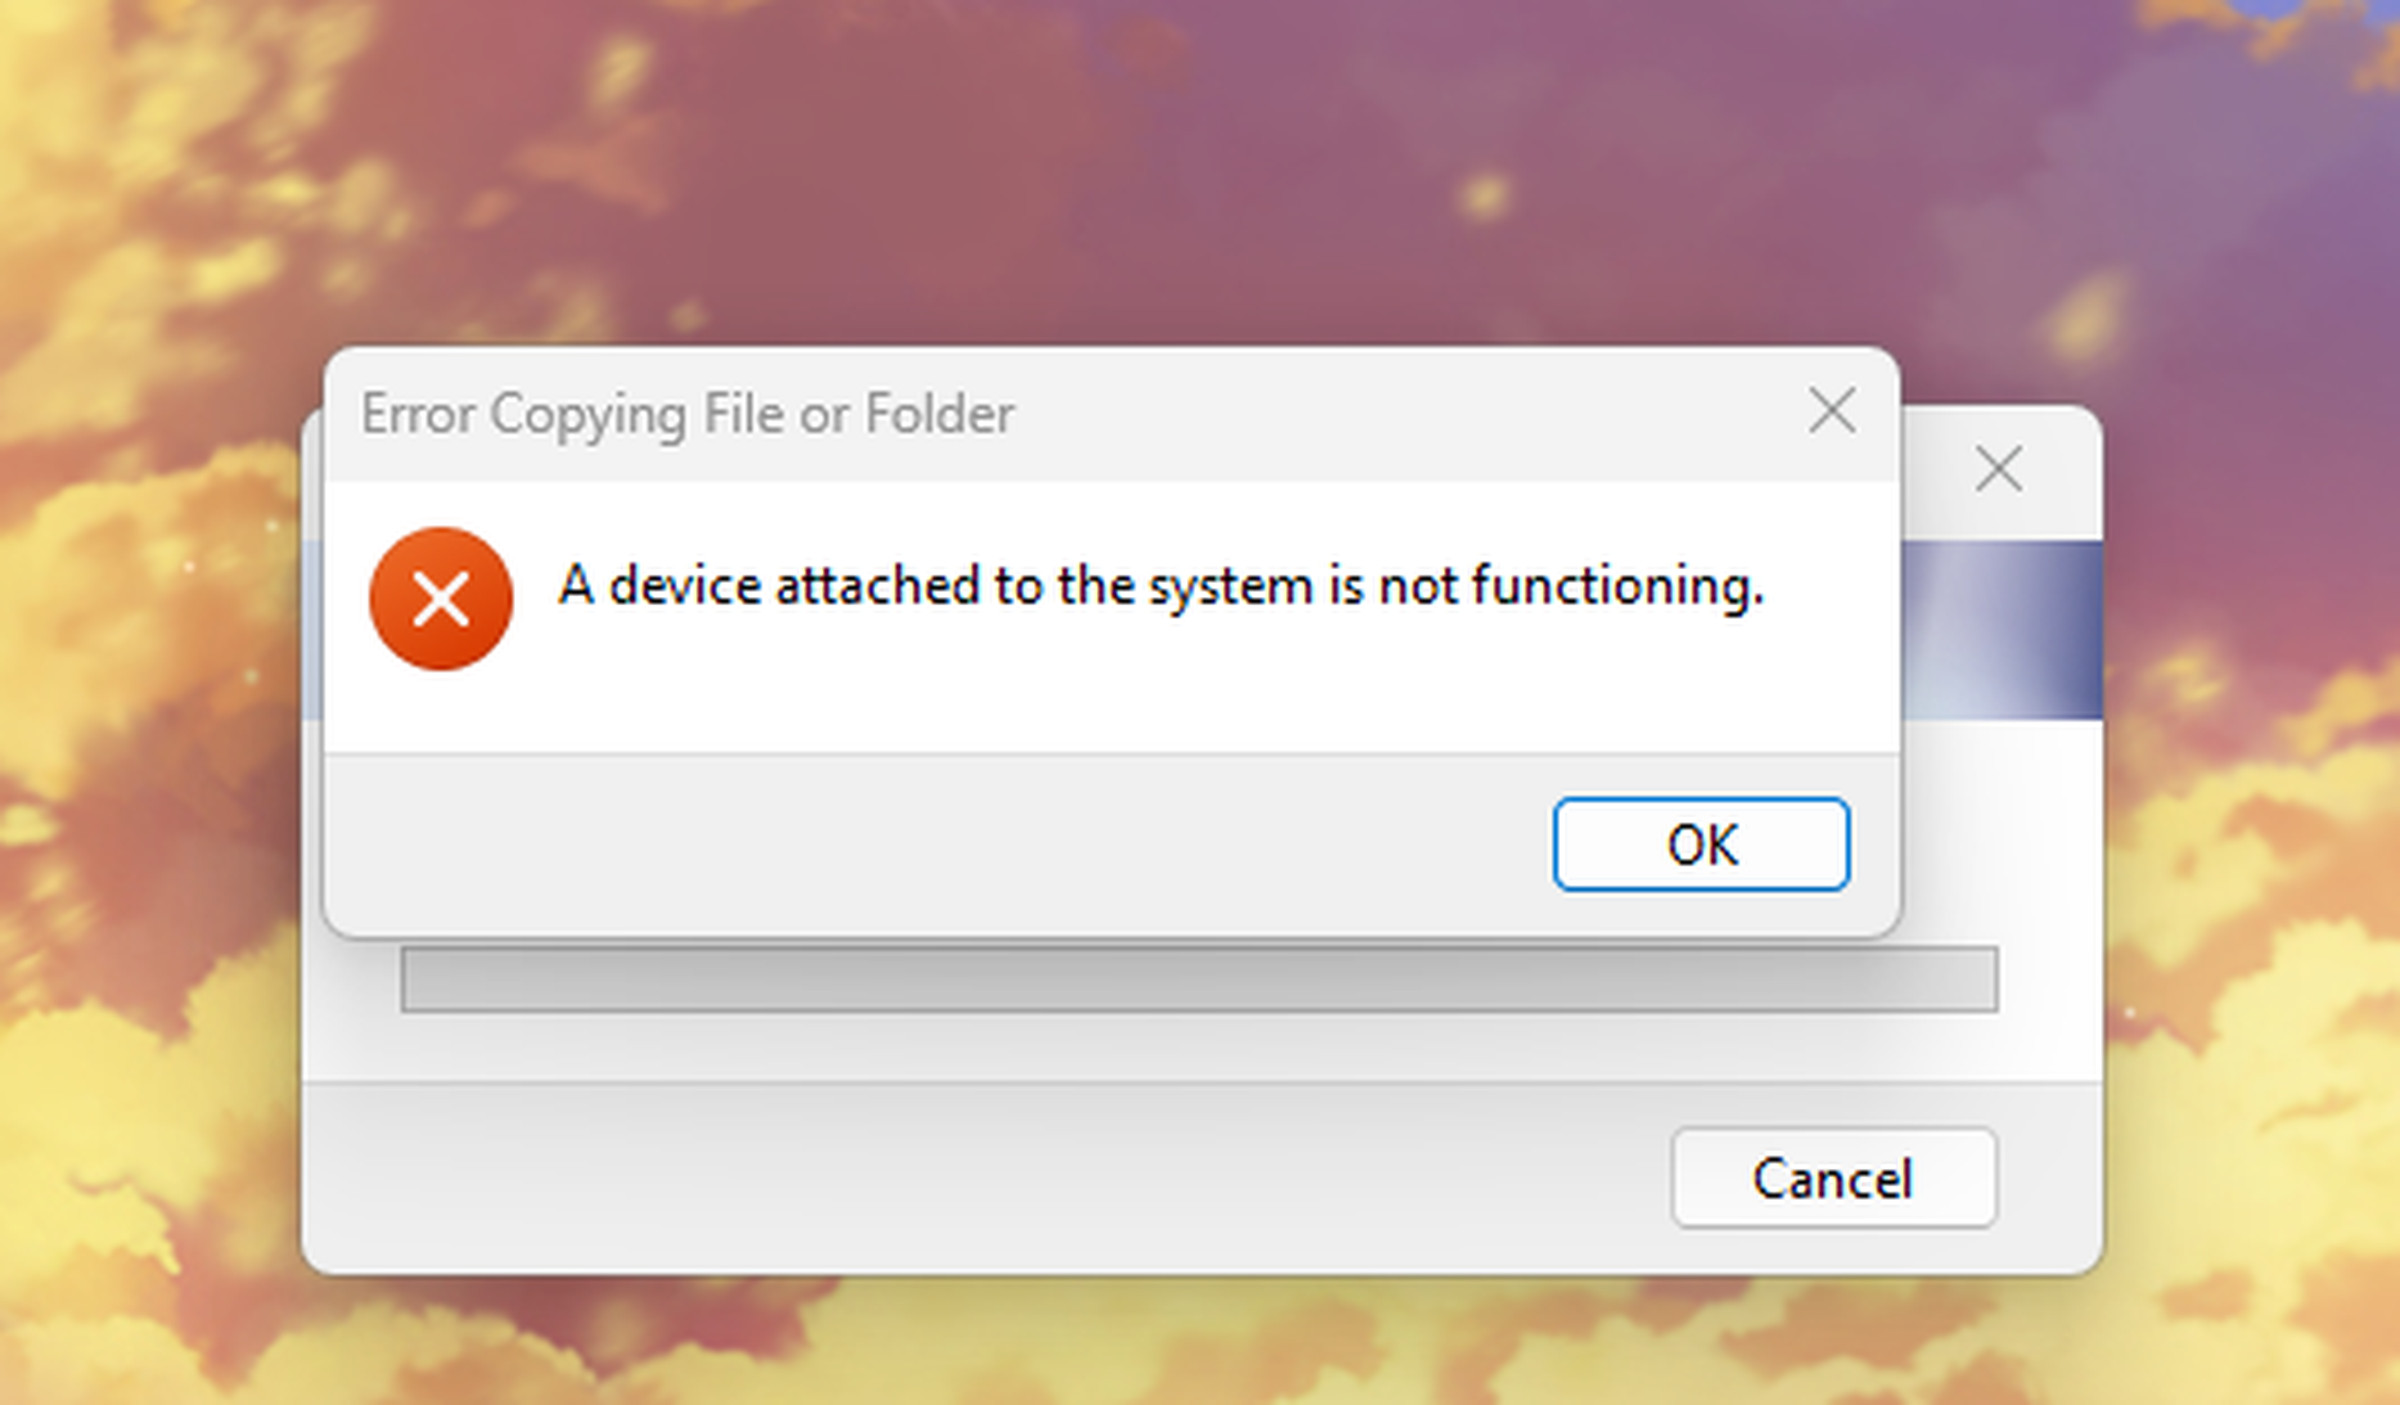 I repeatedly got this “A device attached to the system is not functioning” error on my Windows PC.  The iPhone didn't say anything.